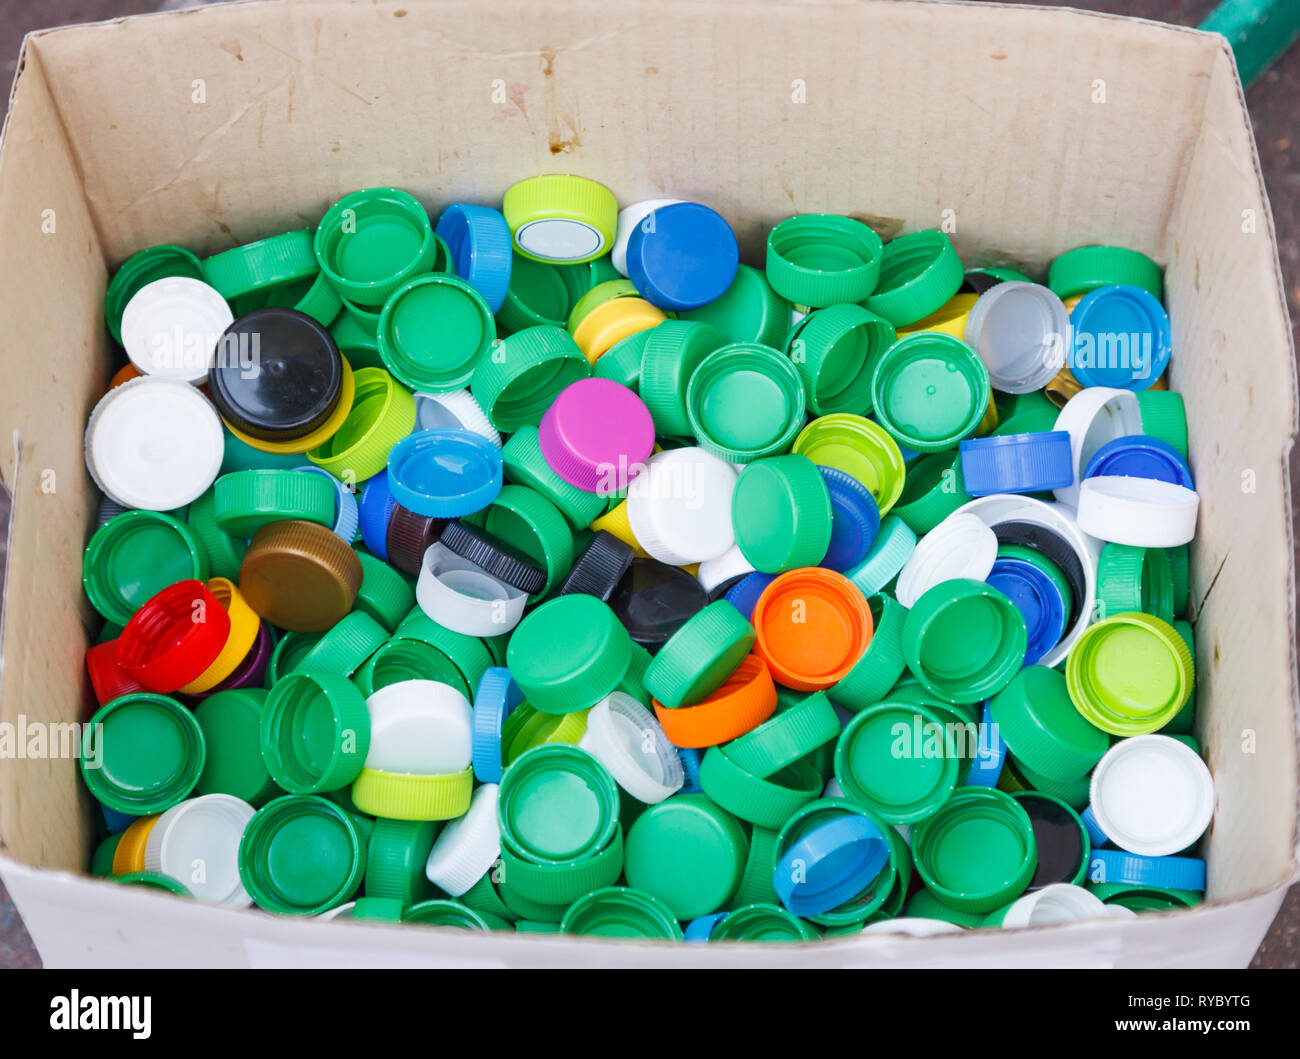 Bottle Cap, made of Polypropylene and Polyethylene Plastic Resin, do not biodegrade. If not recycled, these caps pose danger to marine life because of Stock Photo